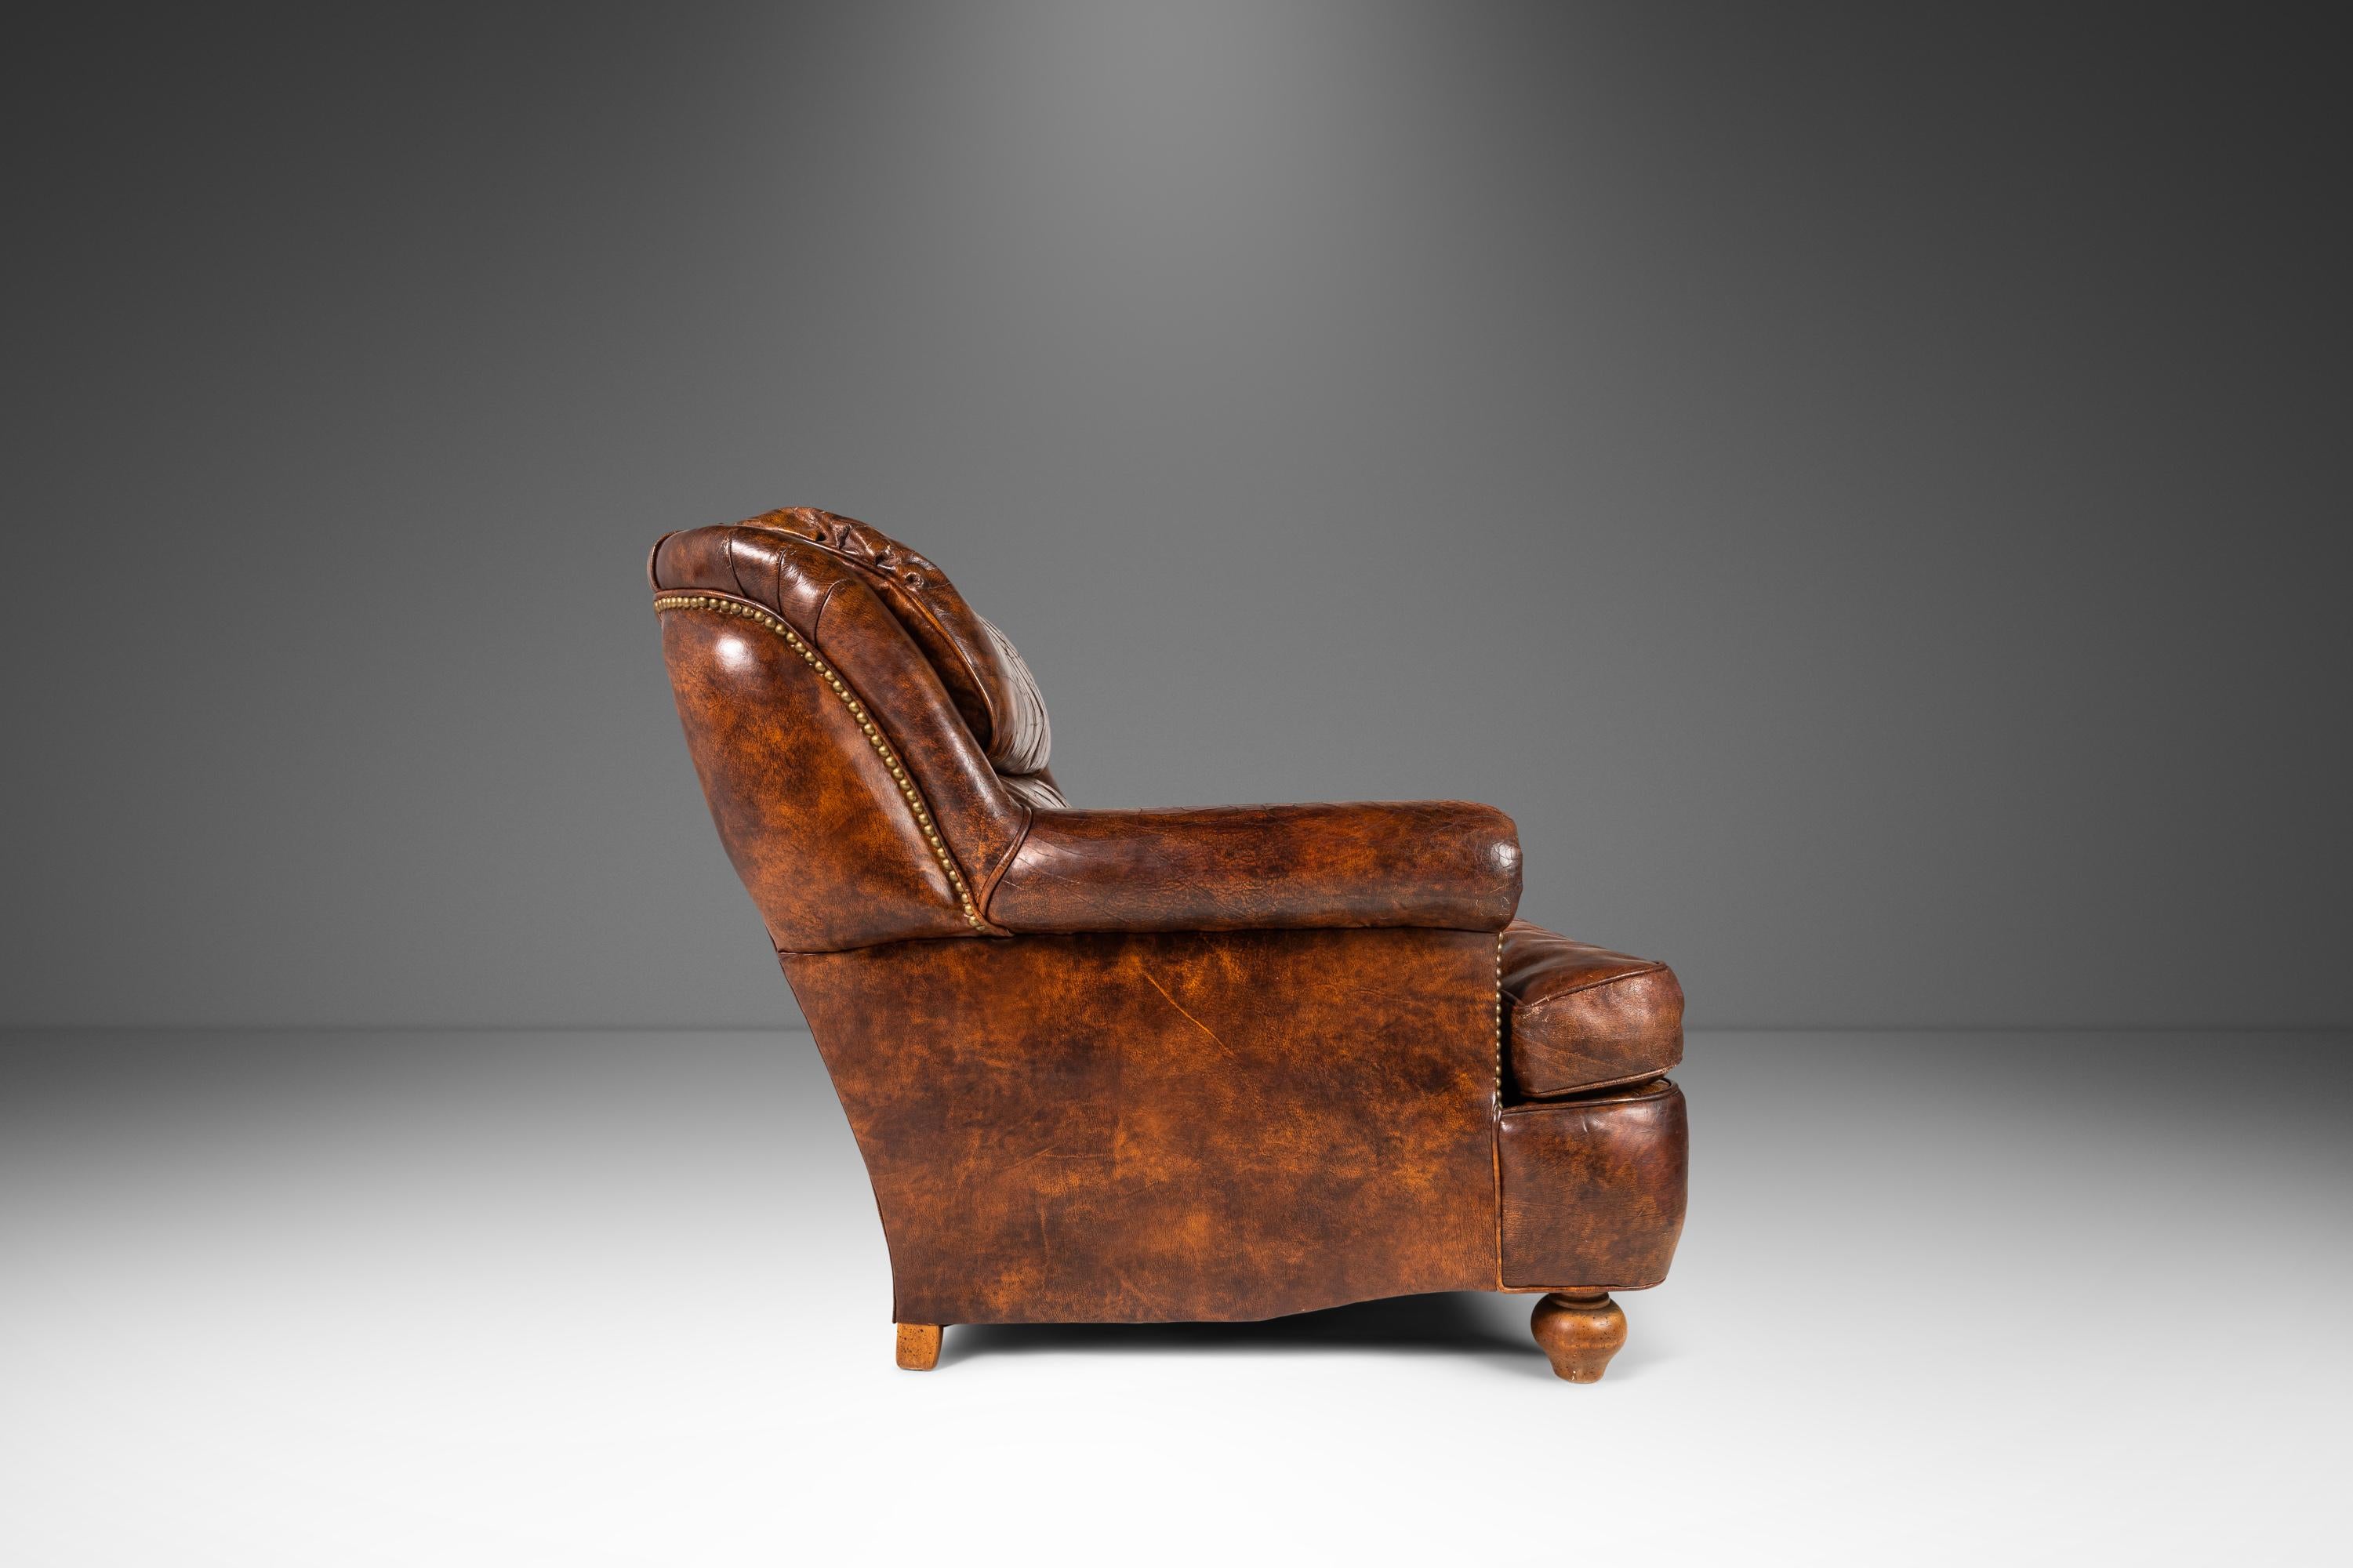 Patinaed French Club Chair Cigar Chair & Ottoman in Distressed Leather c. 1940s For Sale 8